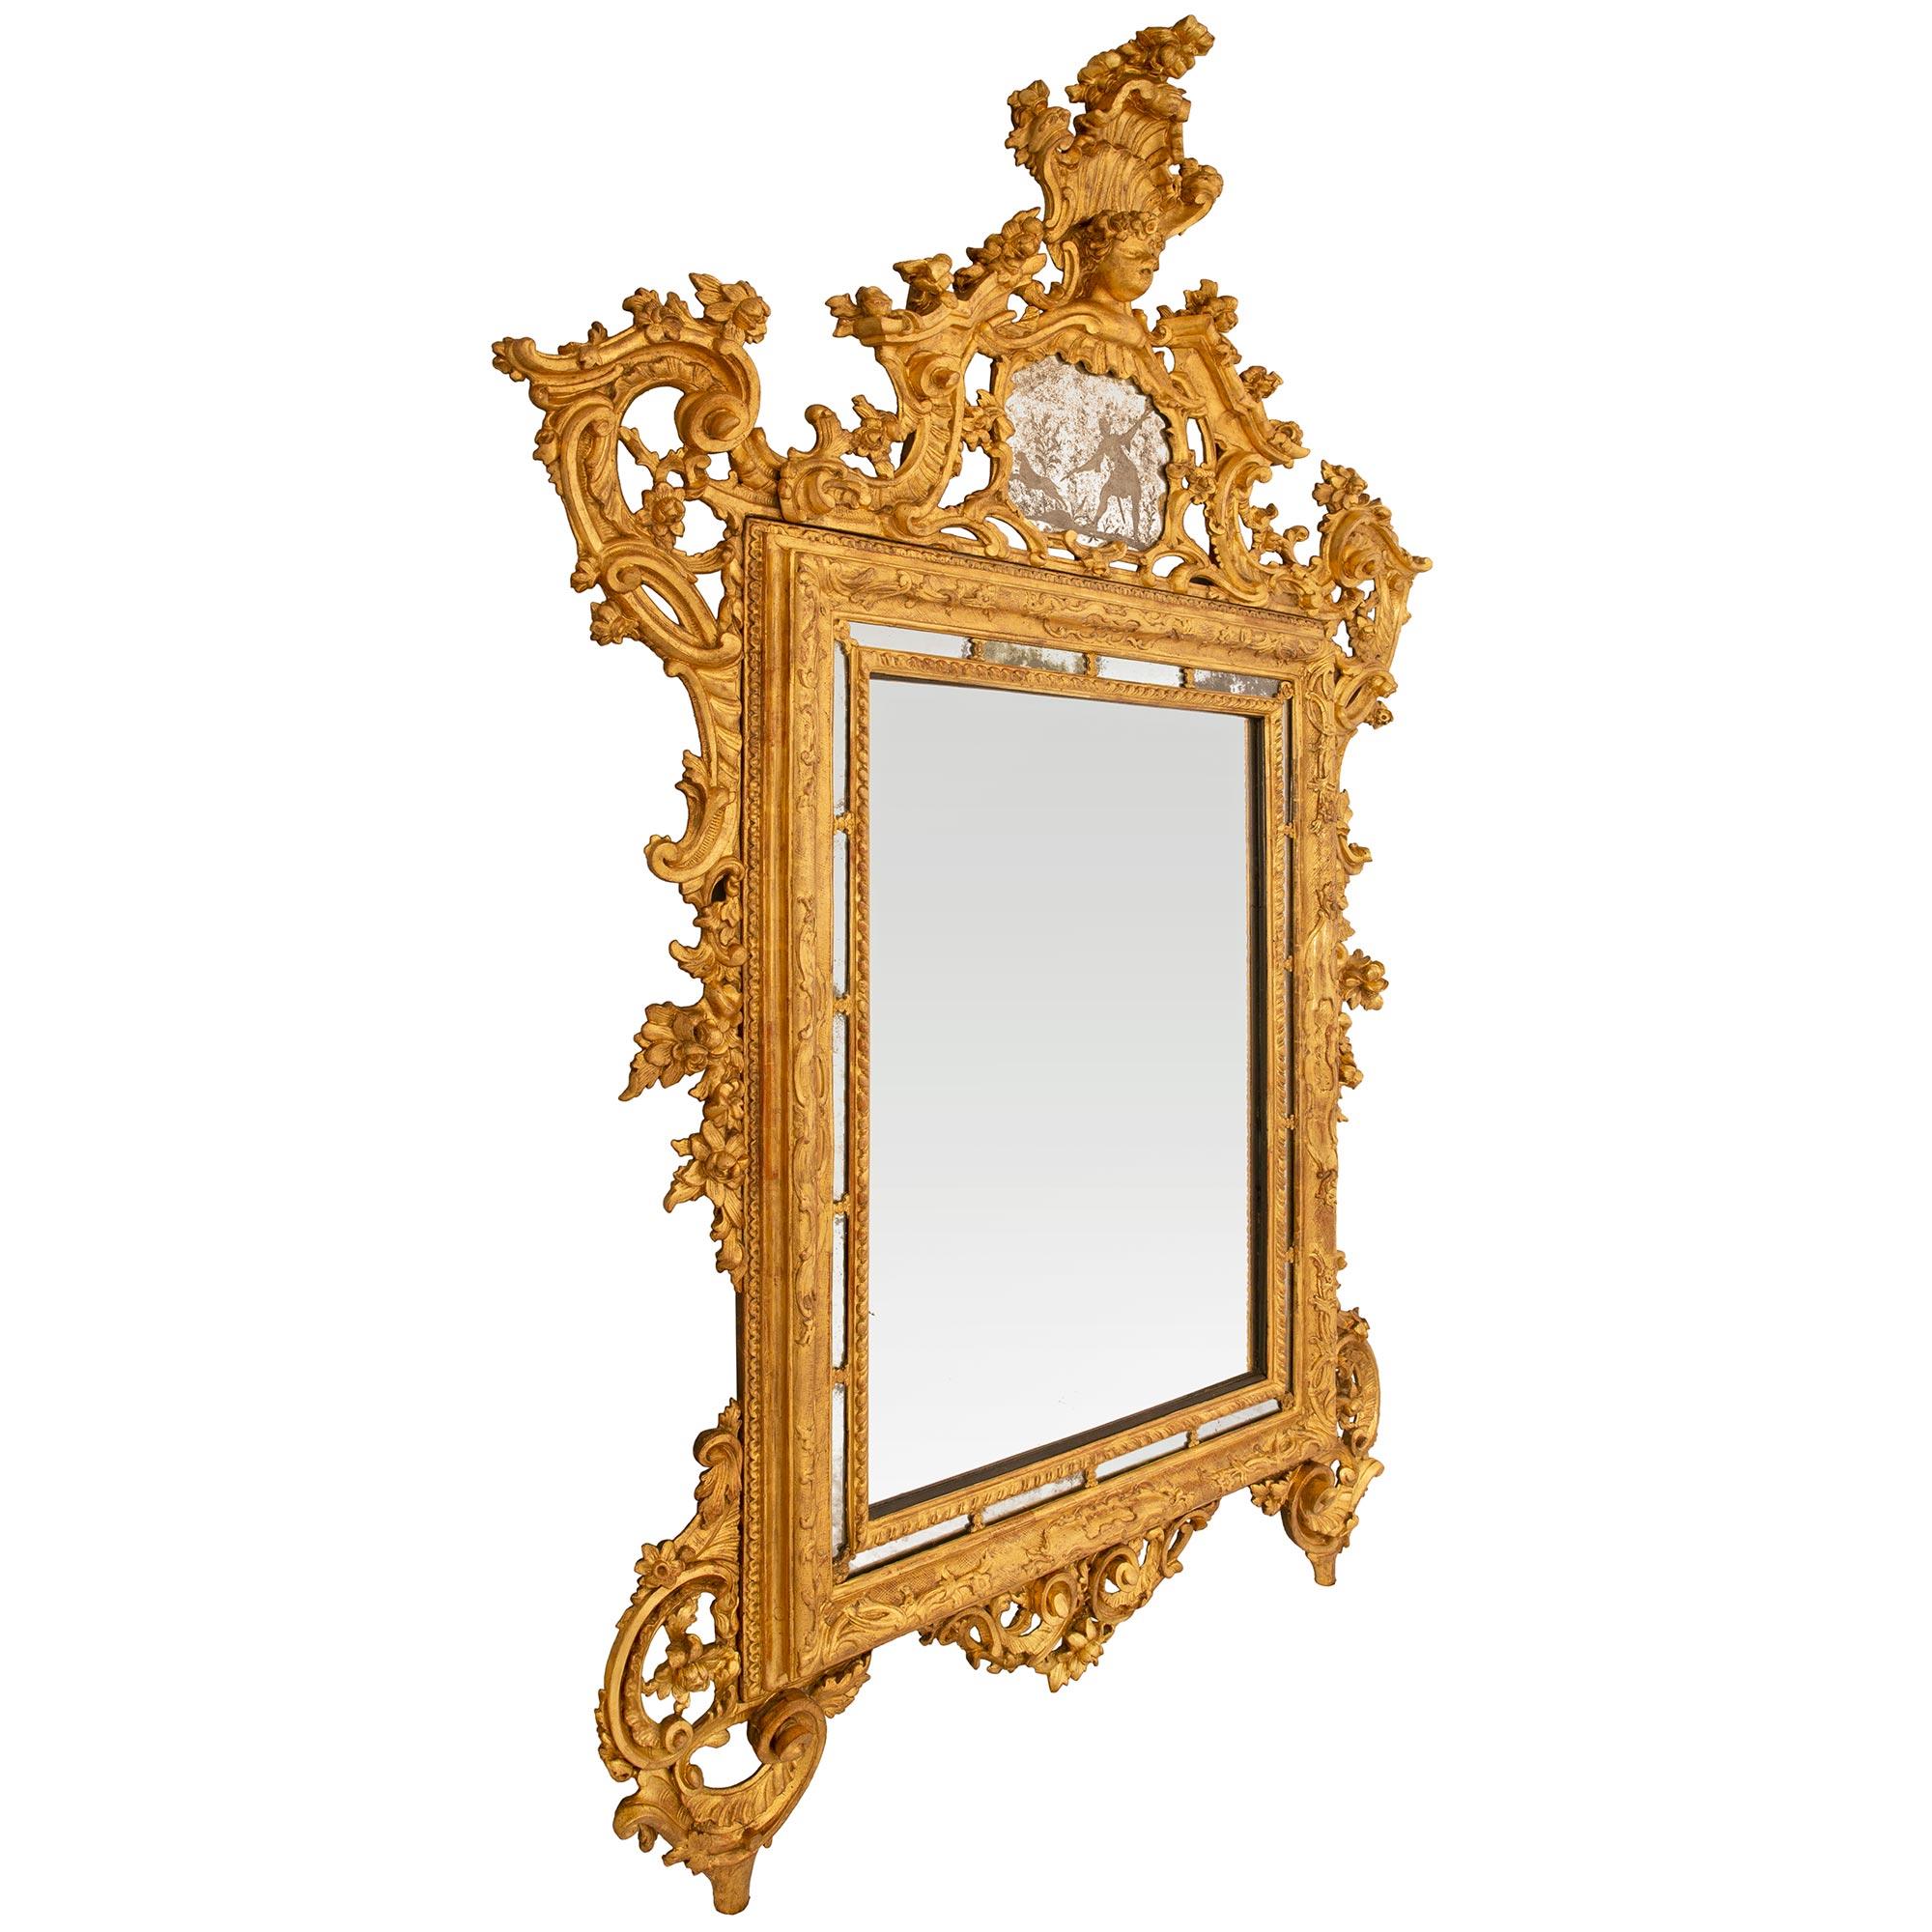 A grand scaled and highly quality Italian 18th century Baroque st. Giltwood mirror, from the collection of Hugh Hefner. This exquisite floor mirror stands on two beautifully scrolled feet attached to very finely carved pierced decorations with